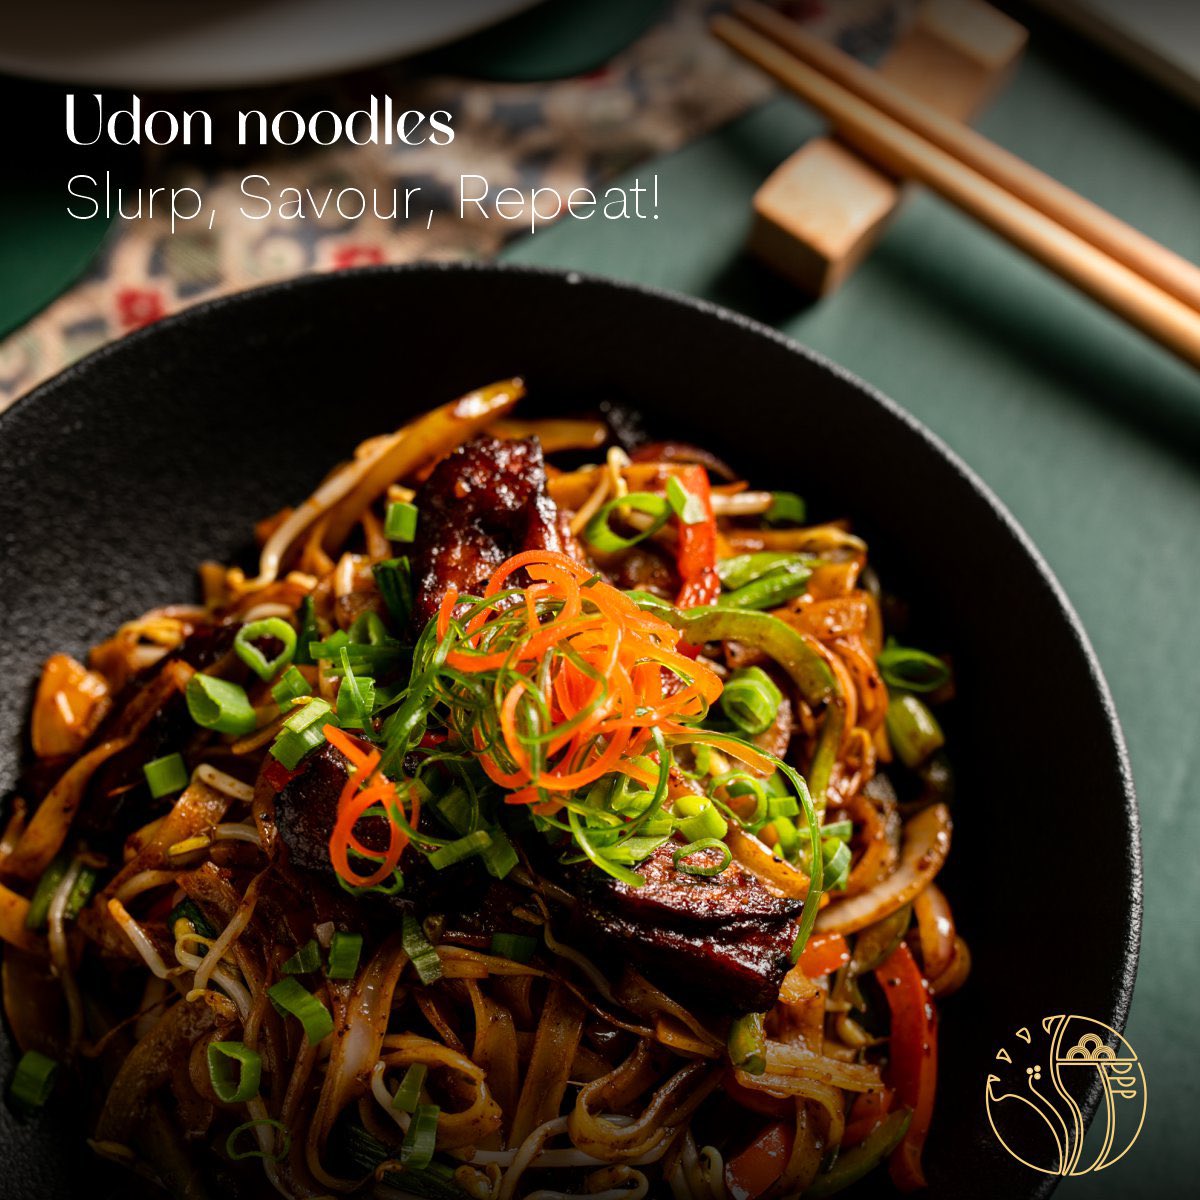 Dive into a bowlful of comfort with Sesami's Udon Noodles! 🍜✨ Each slurp is a journey to satisfaction, crafted just for you.
Ready to elevate your noodle game? Join us at Sesami Now!
.
#UdonUtopia #NoodleAdventure #Thesesamiexperience #SesamiBrunch #sesamifeast  #asianfood